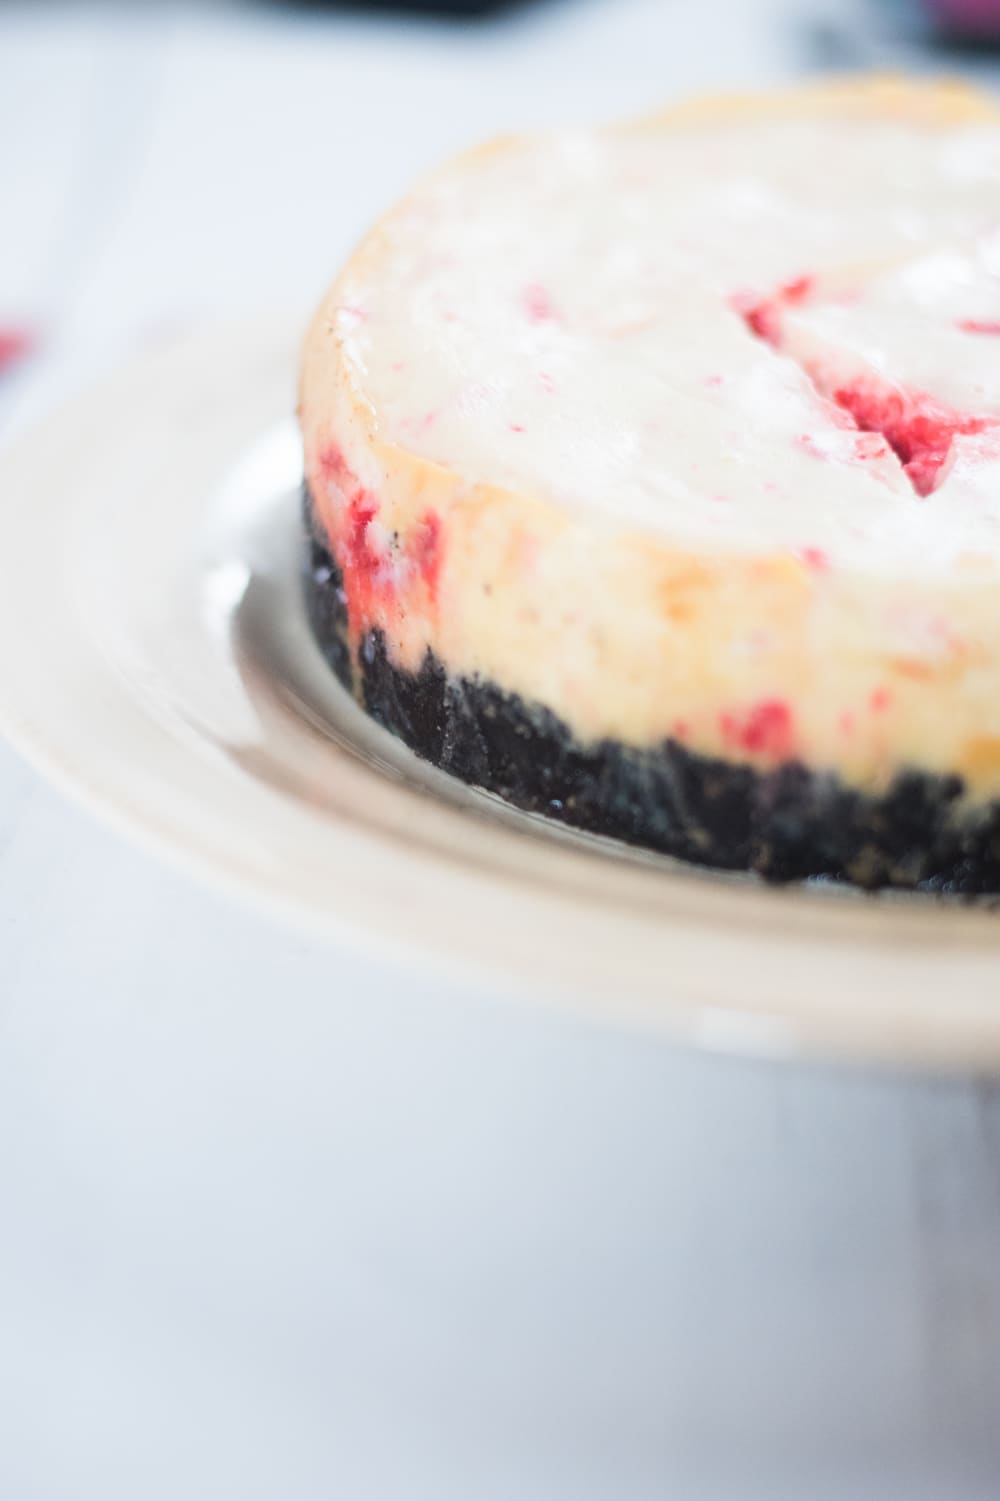 A close up of a piece of cake on a plate, with Cheesecake and Peppermint